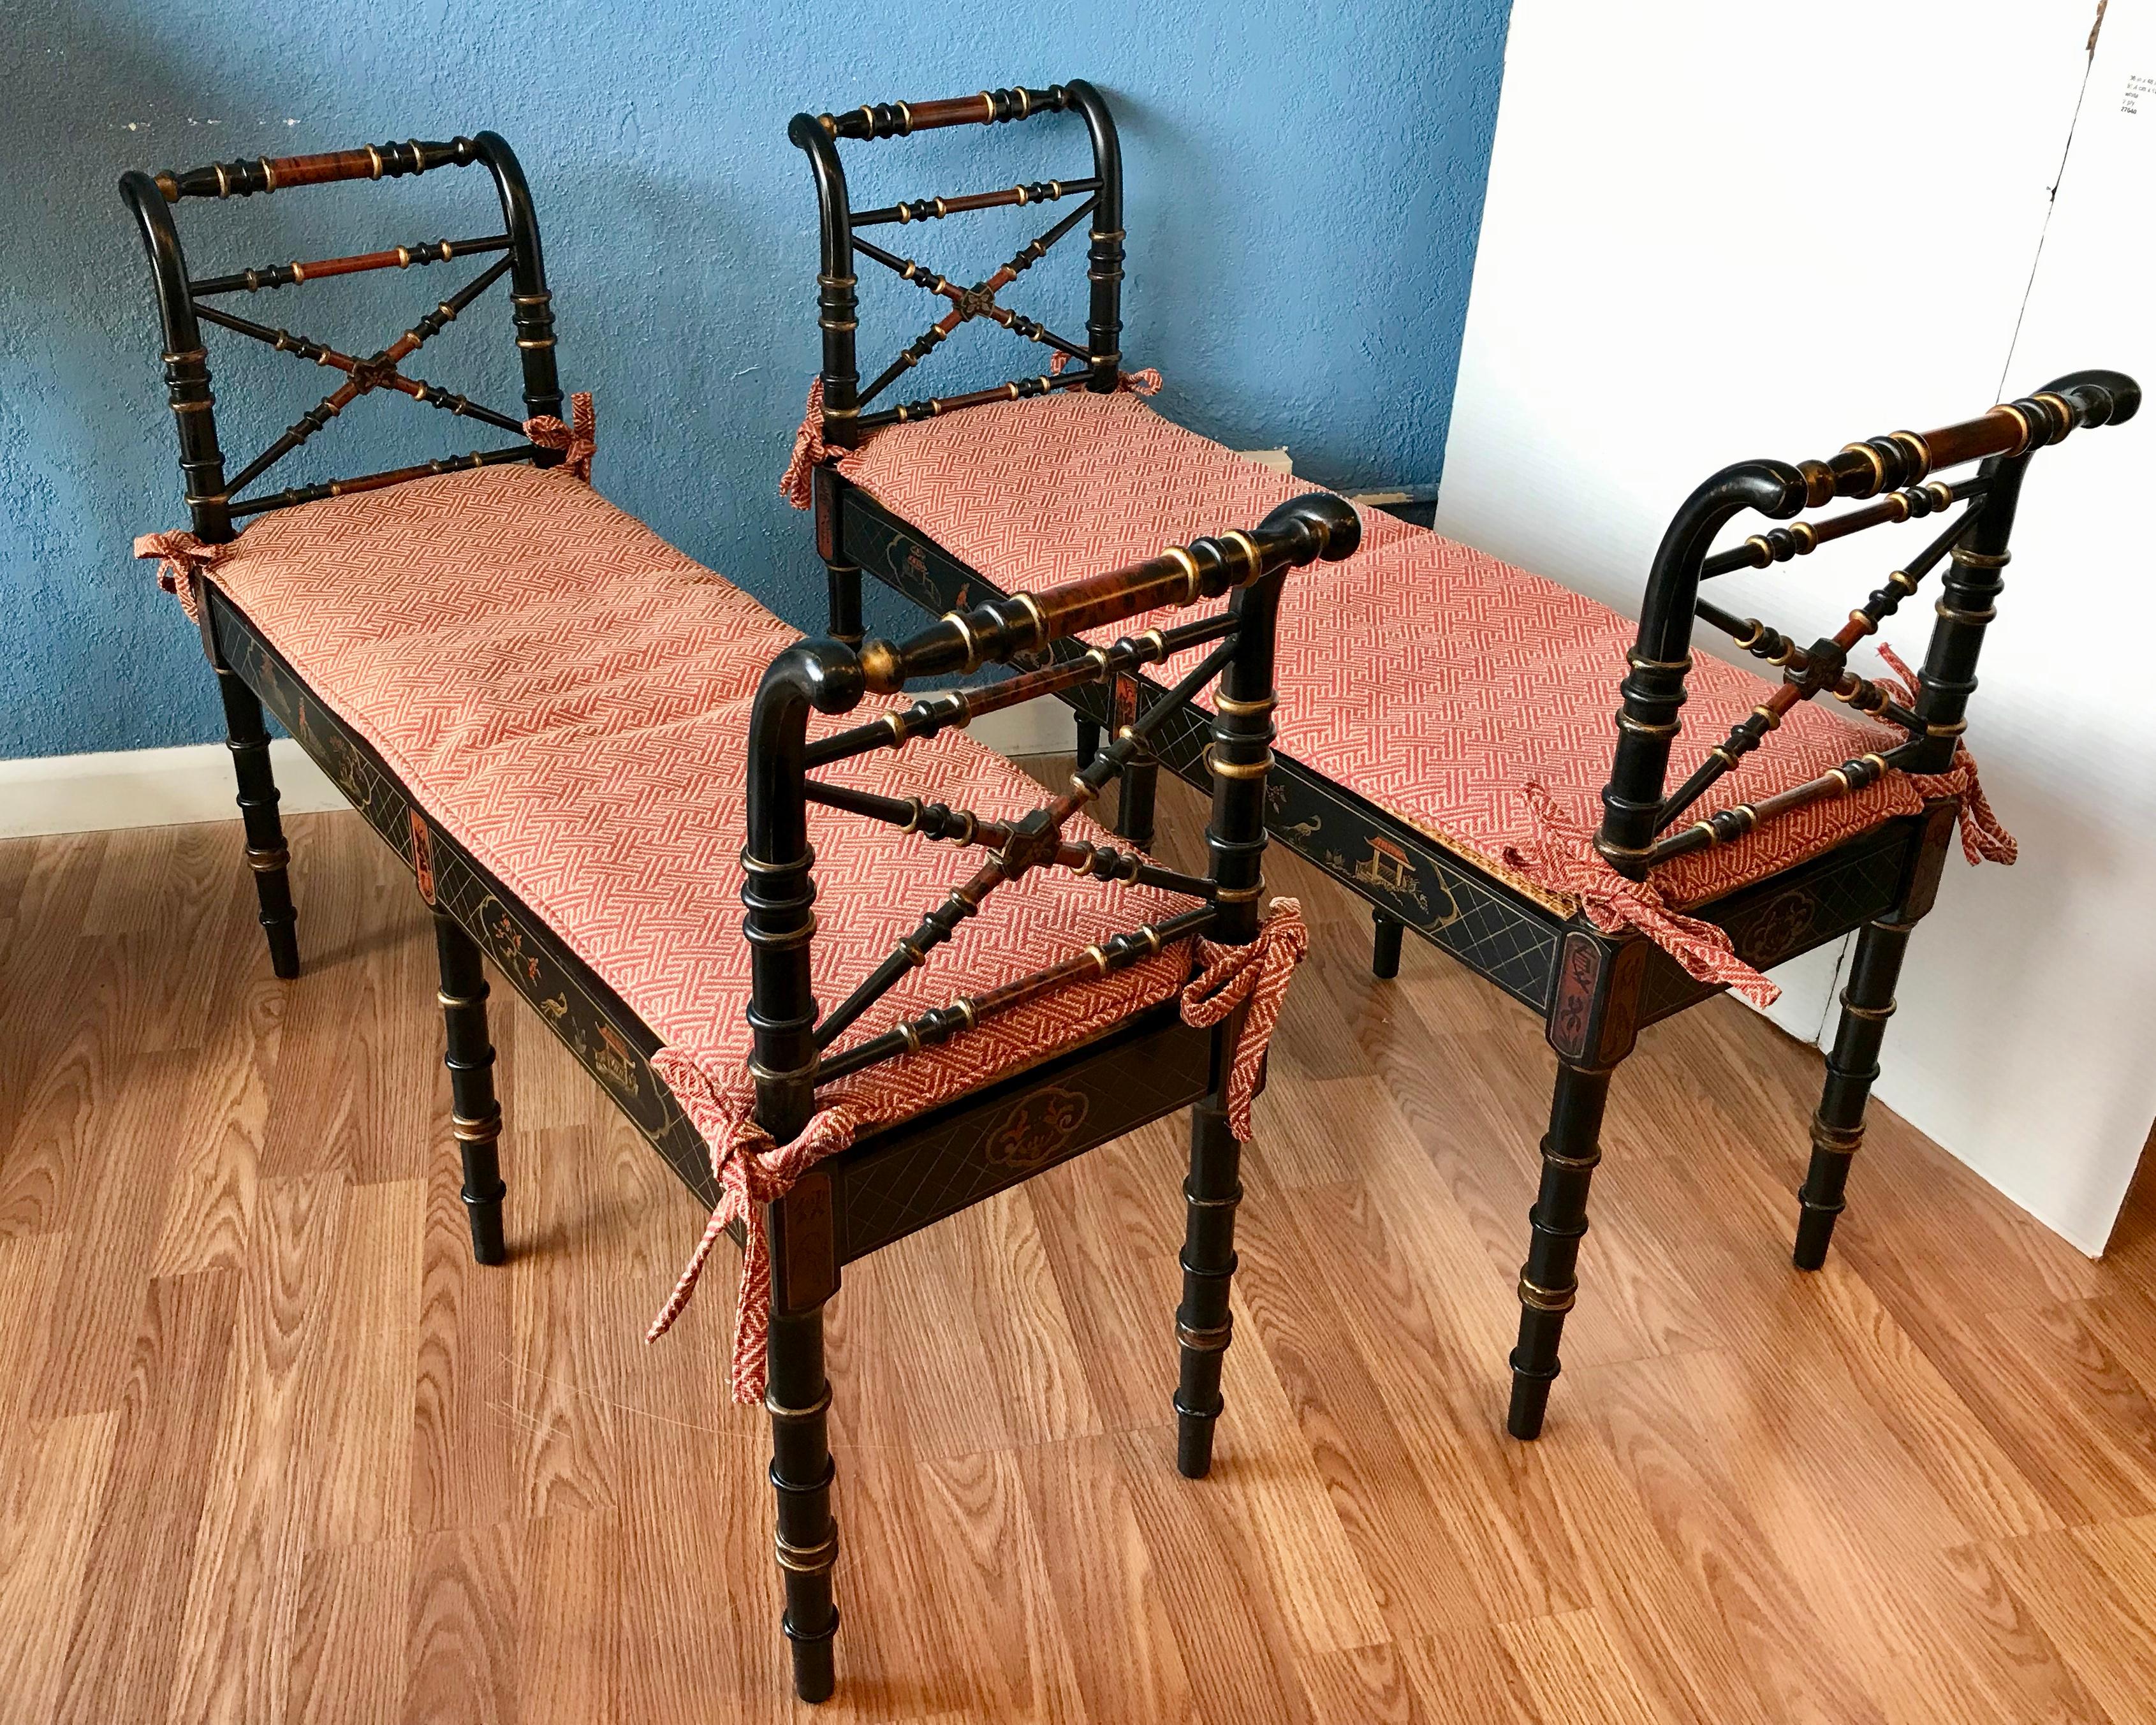 Exceptionally well detailed; the benches are beautifully painted and appointed 
with faux tortoise accents. The seats are caned and fitted with loose fitted cushions.